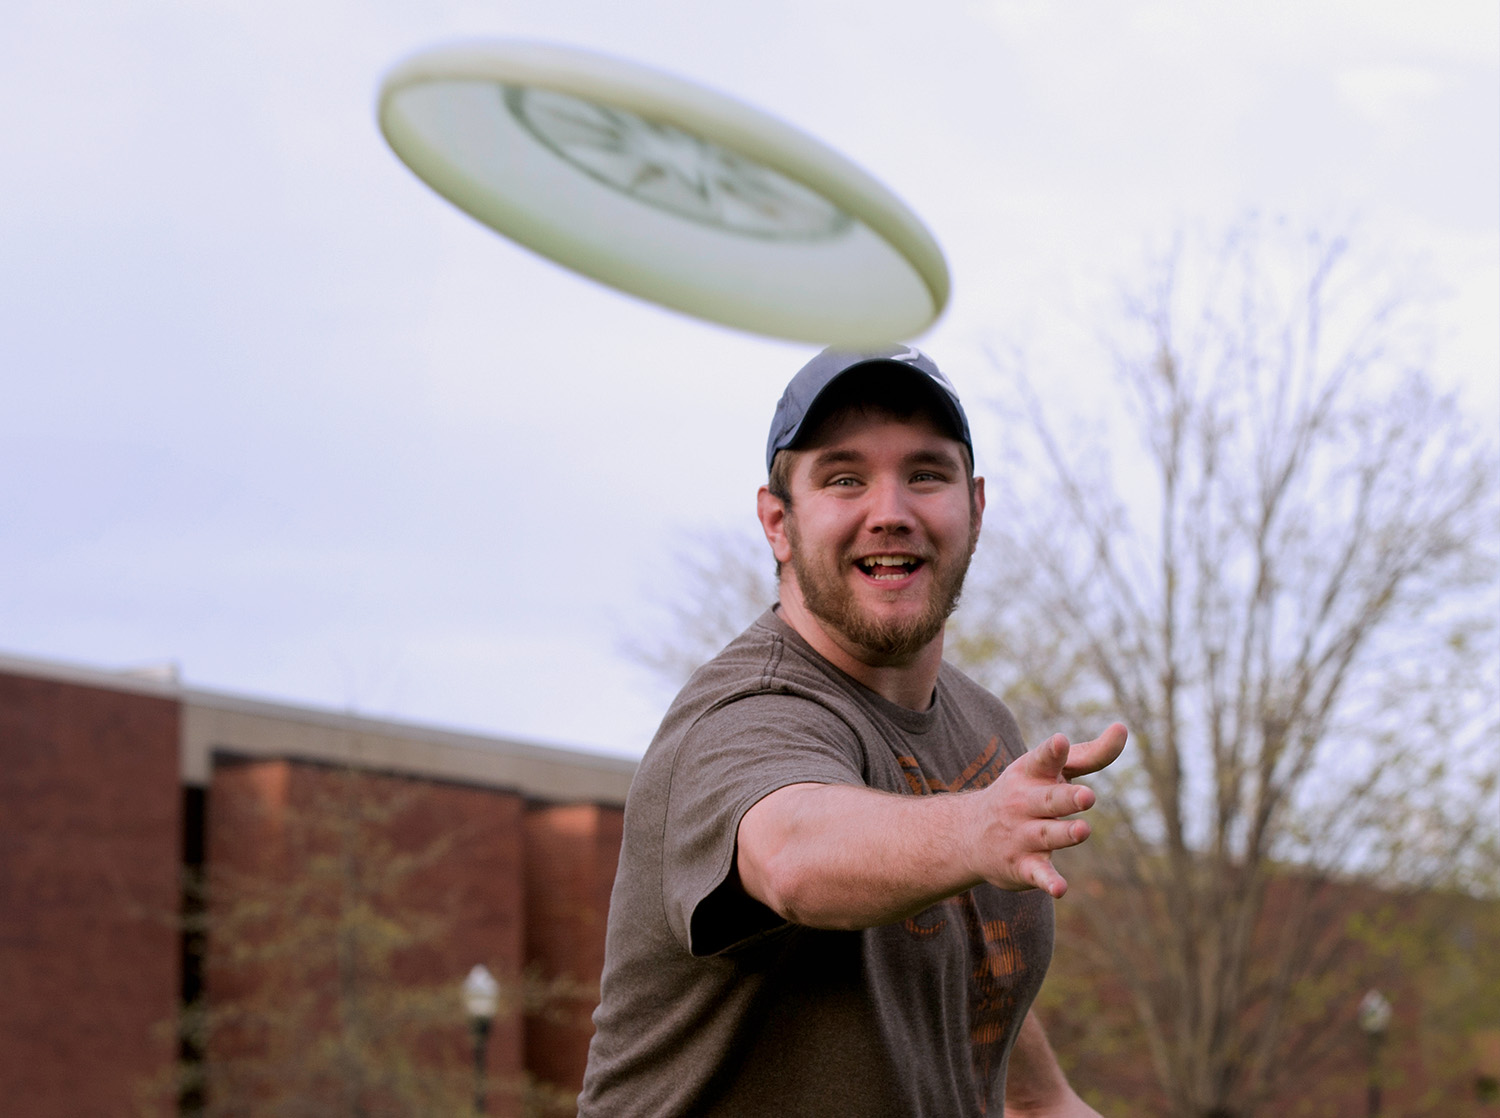 A student throws a frisbee to a friend on the campus mall